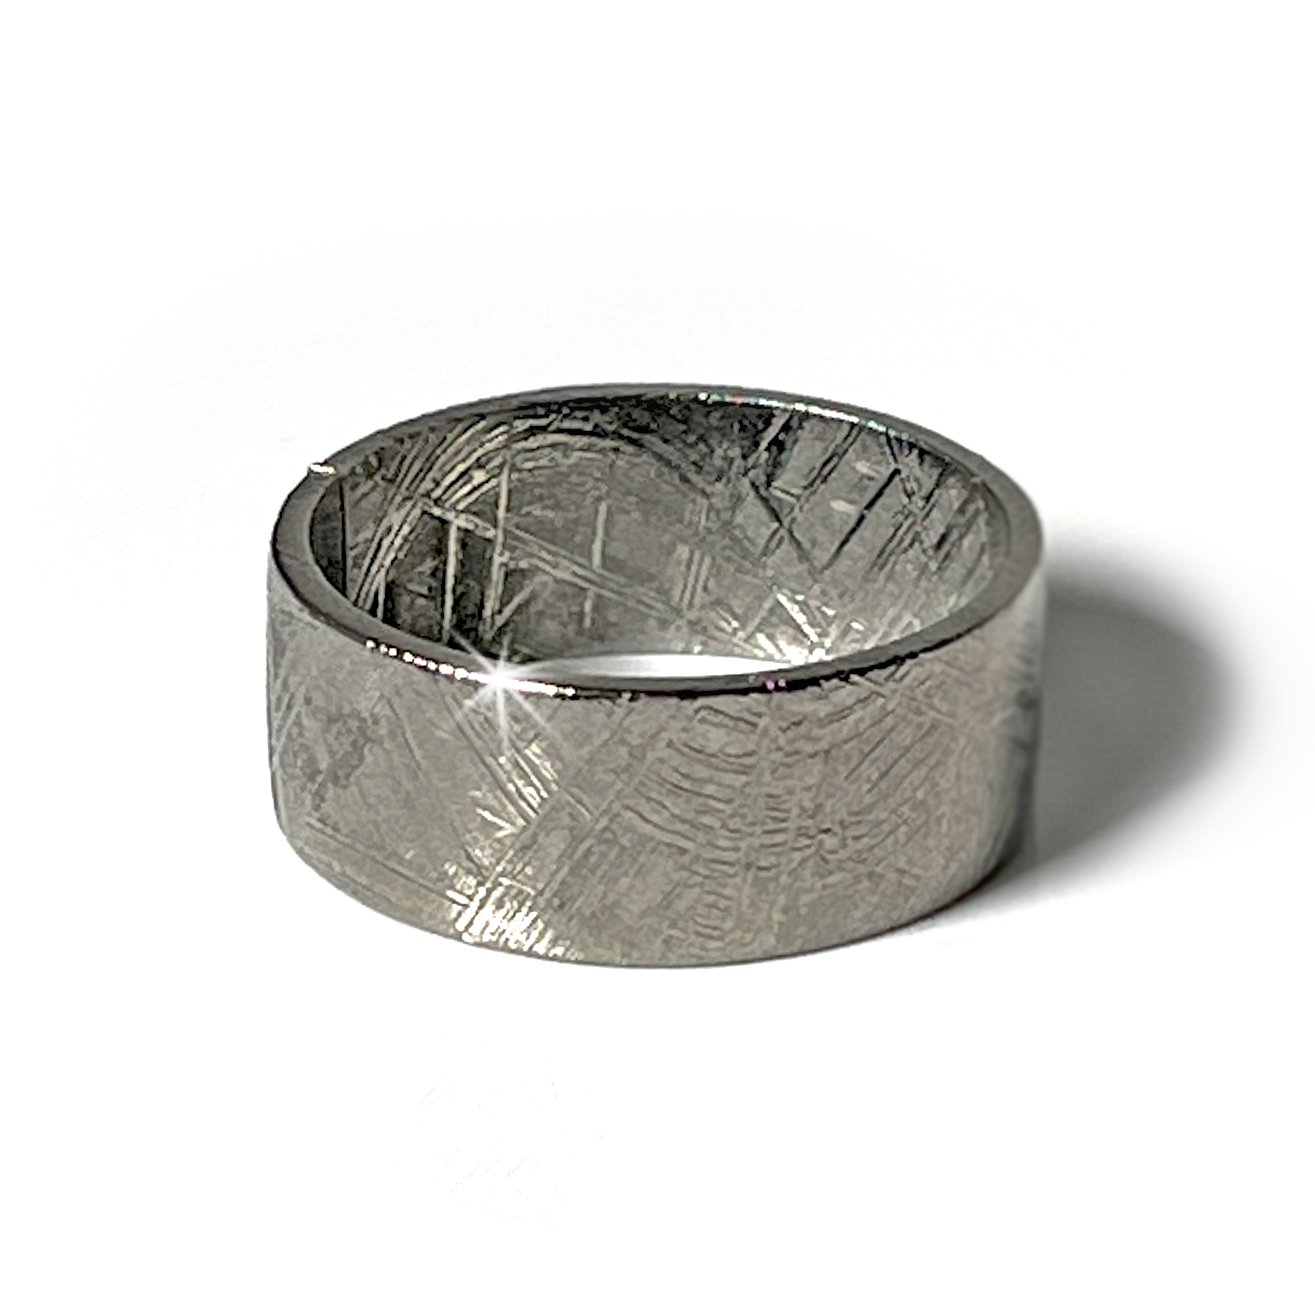 Meteorite Ring Size 13.25 Muonionalusta Solid Band 10mm